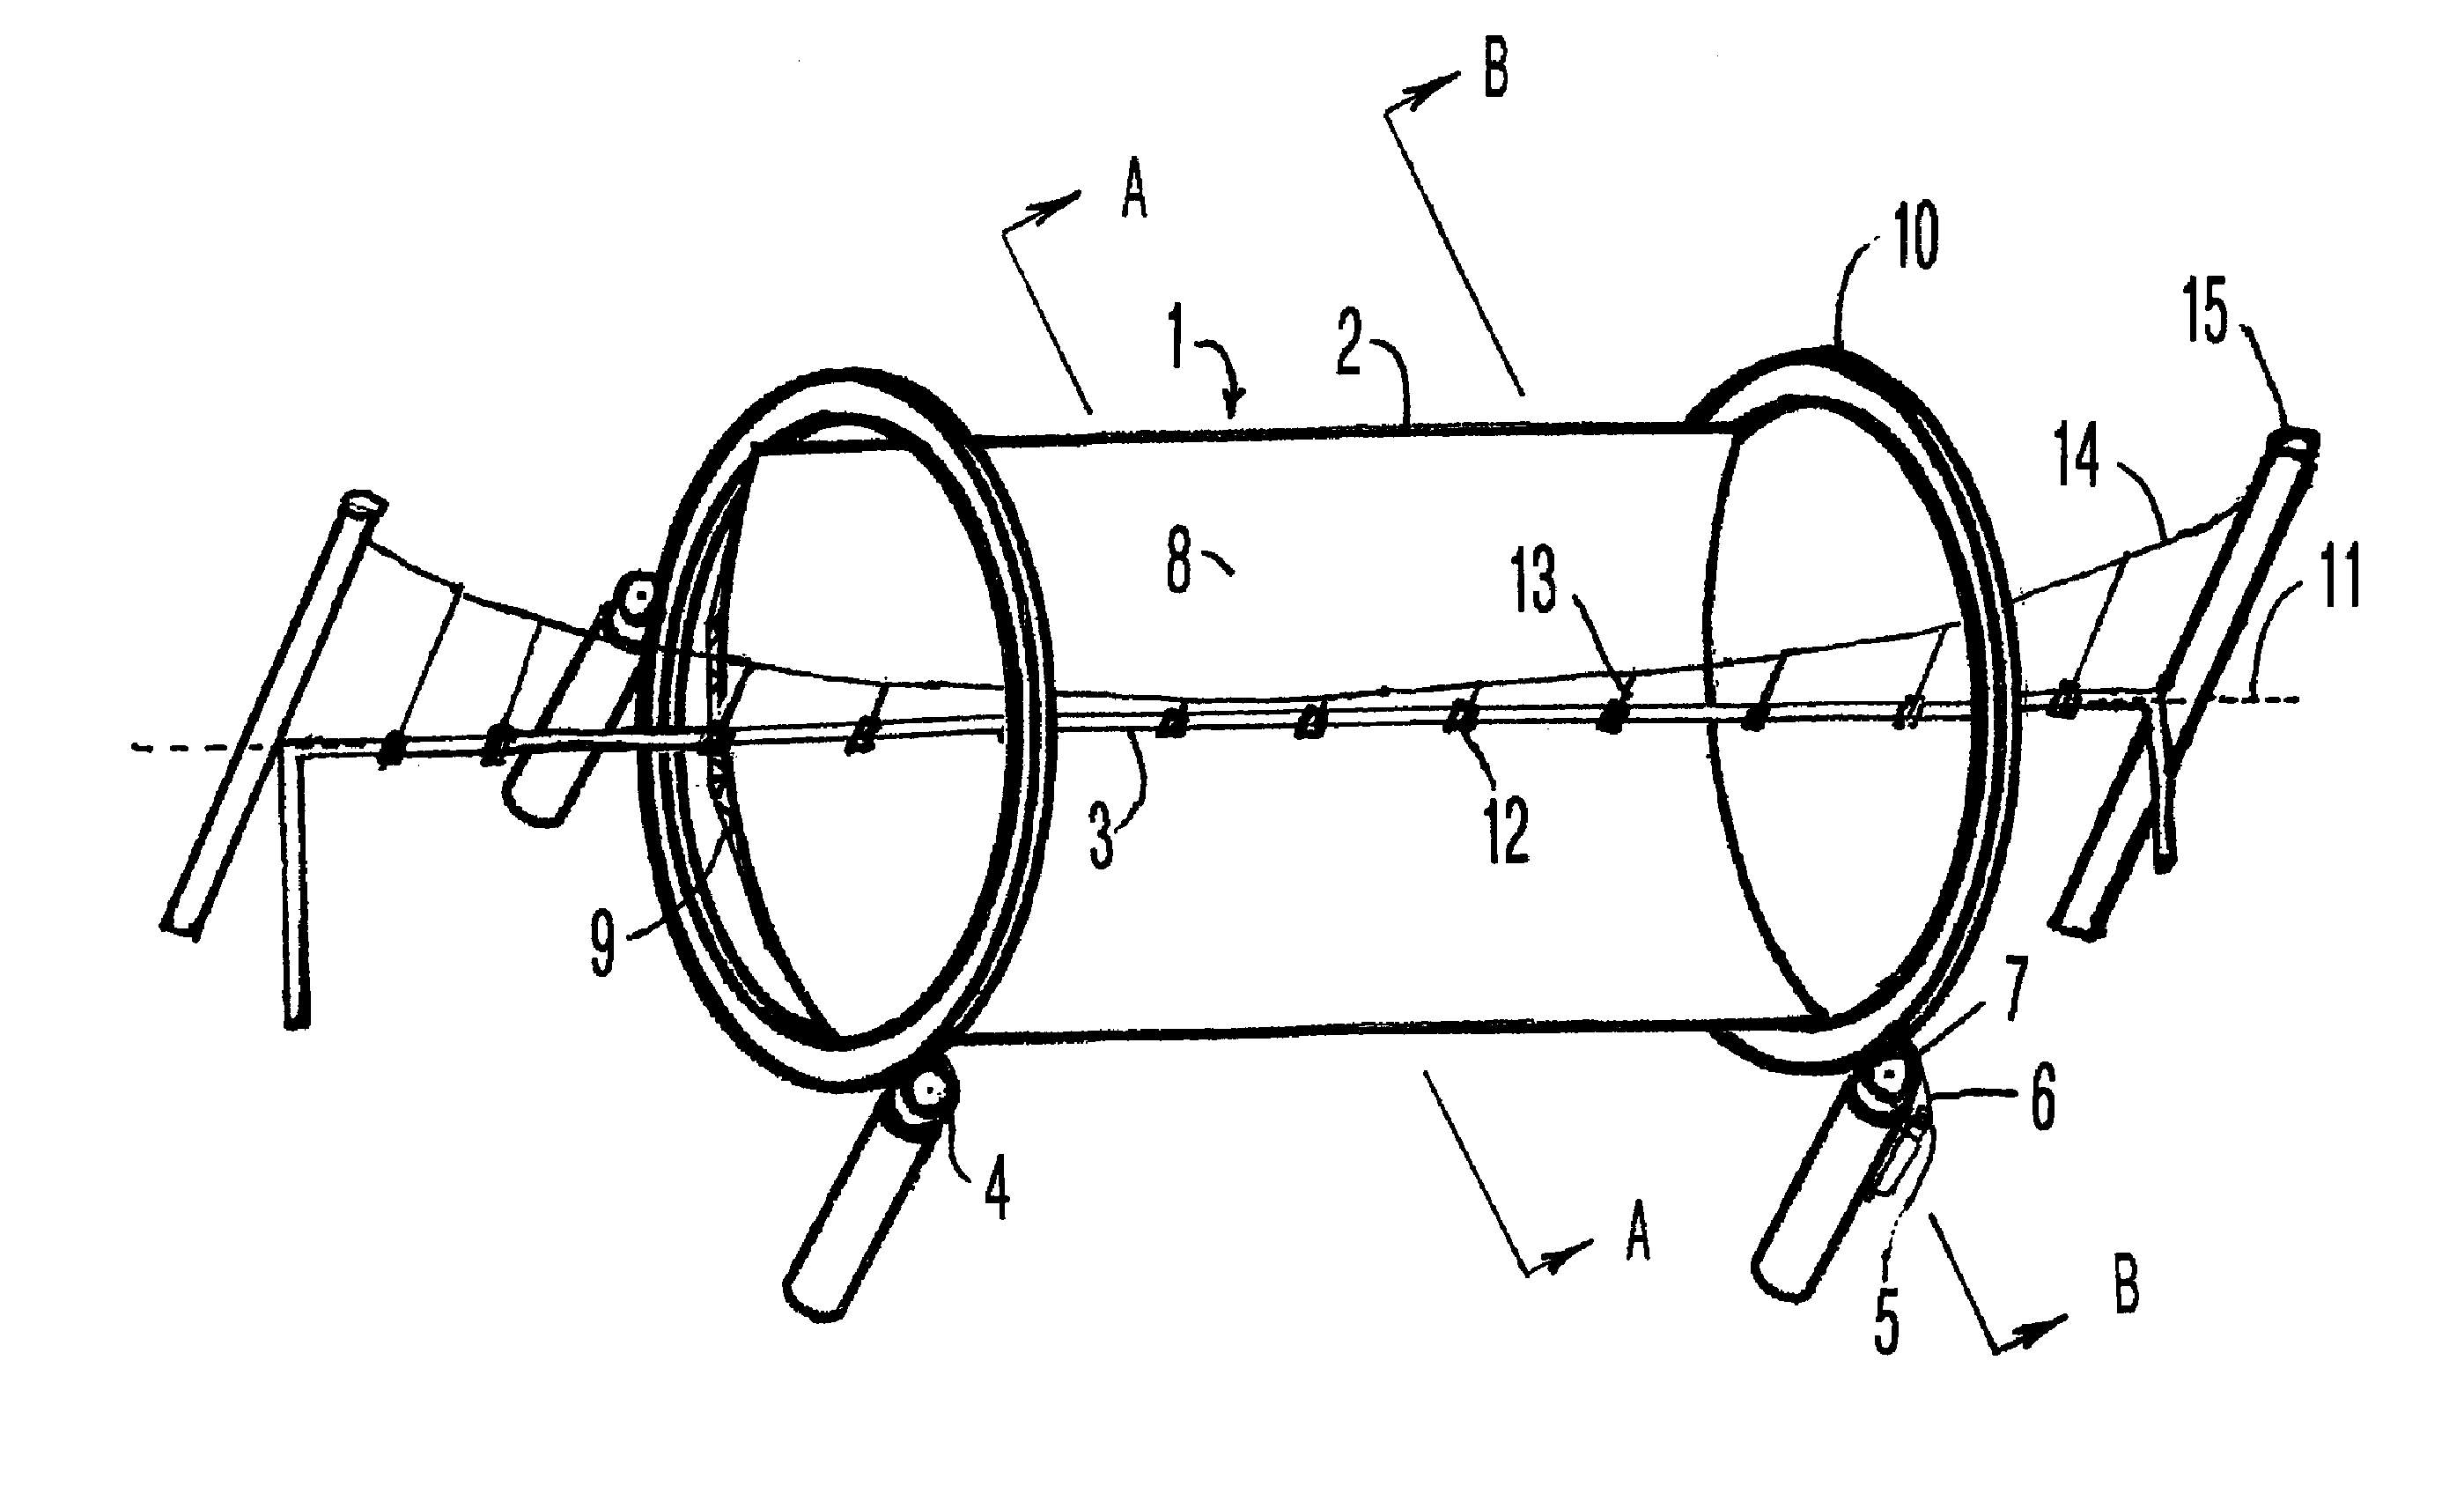 Parabolic trough solar reflector with an independently supported collector tube